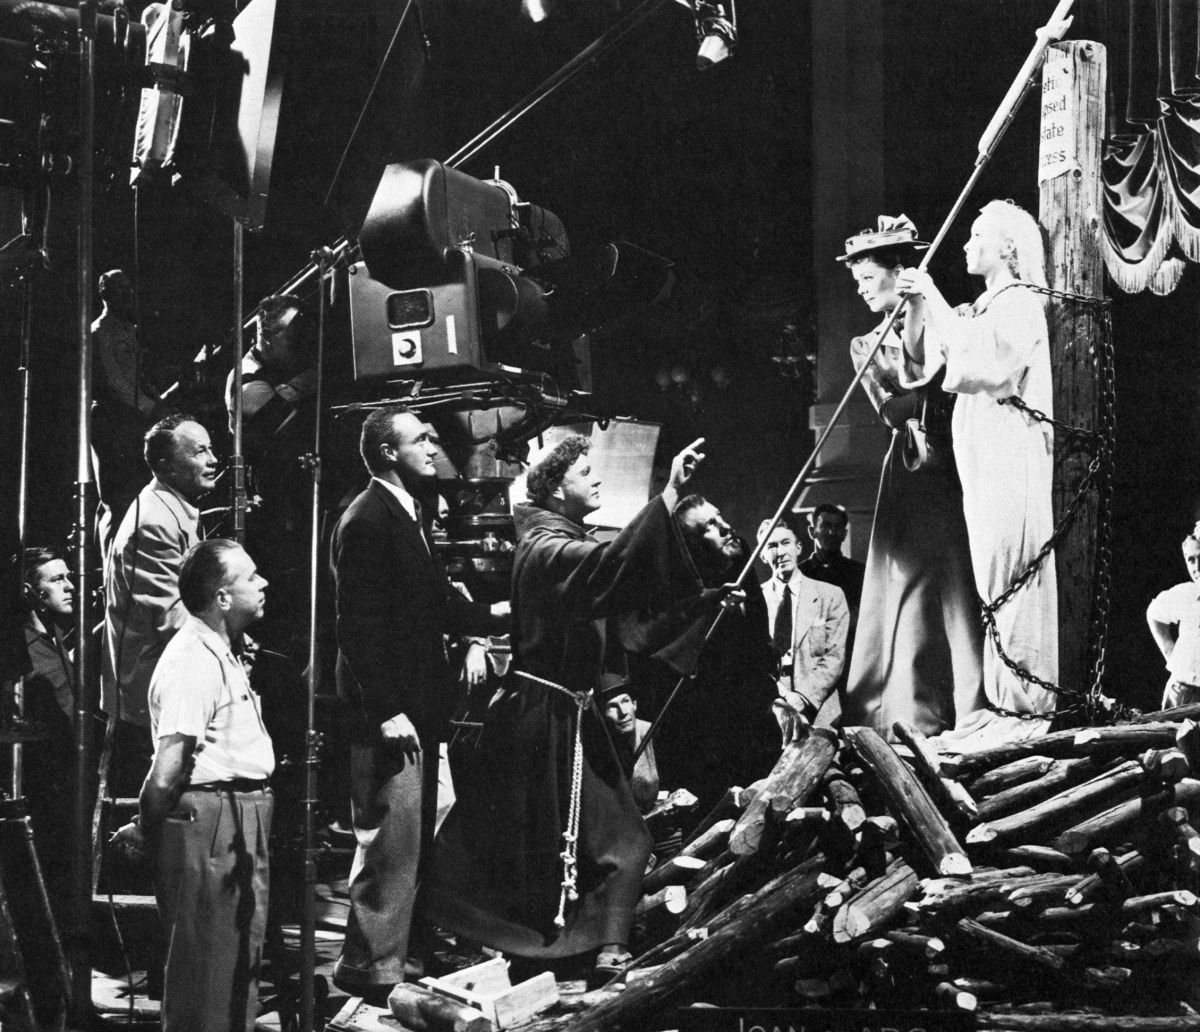 On the set are Sam Goode, boom operator; Marley; Norman McClav, best boy; Lothrop Worth, camera operator; DeToth; Red Turner, prop artist; star Vincent Price; Jimmy McMahon, assistant director; and star Phyllis Kirk with the effigy of St. Joan.